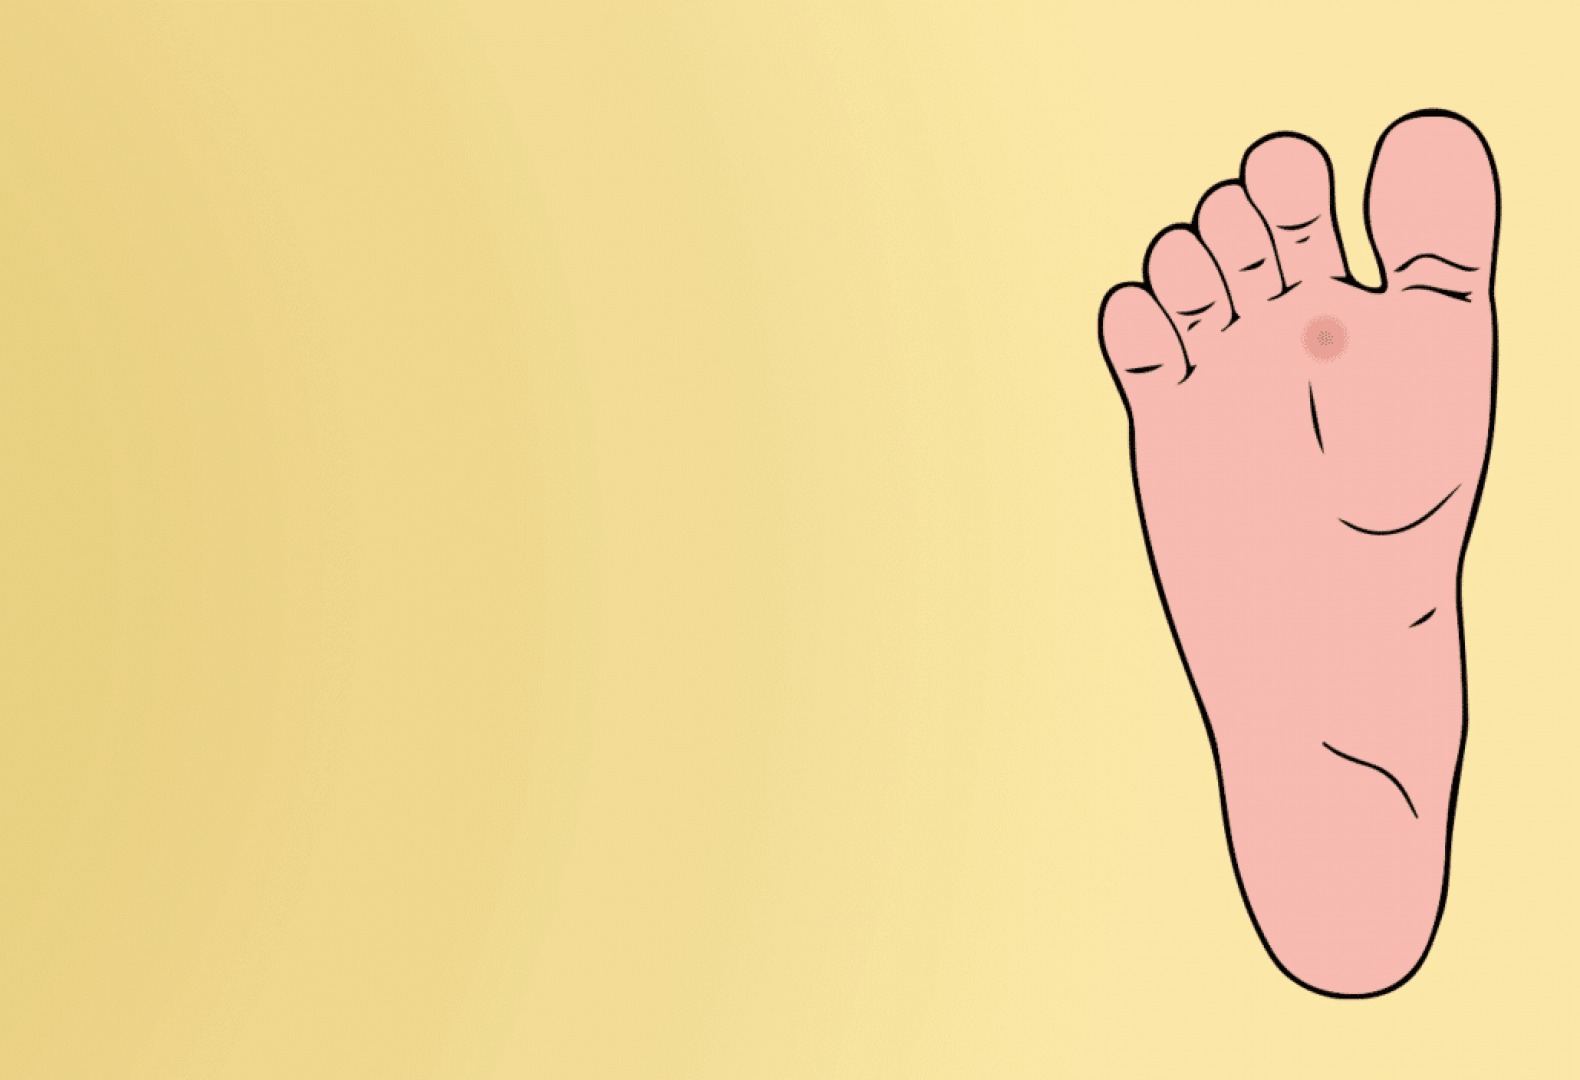 Illustration of feet with corns on the ball of foot and around the toes